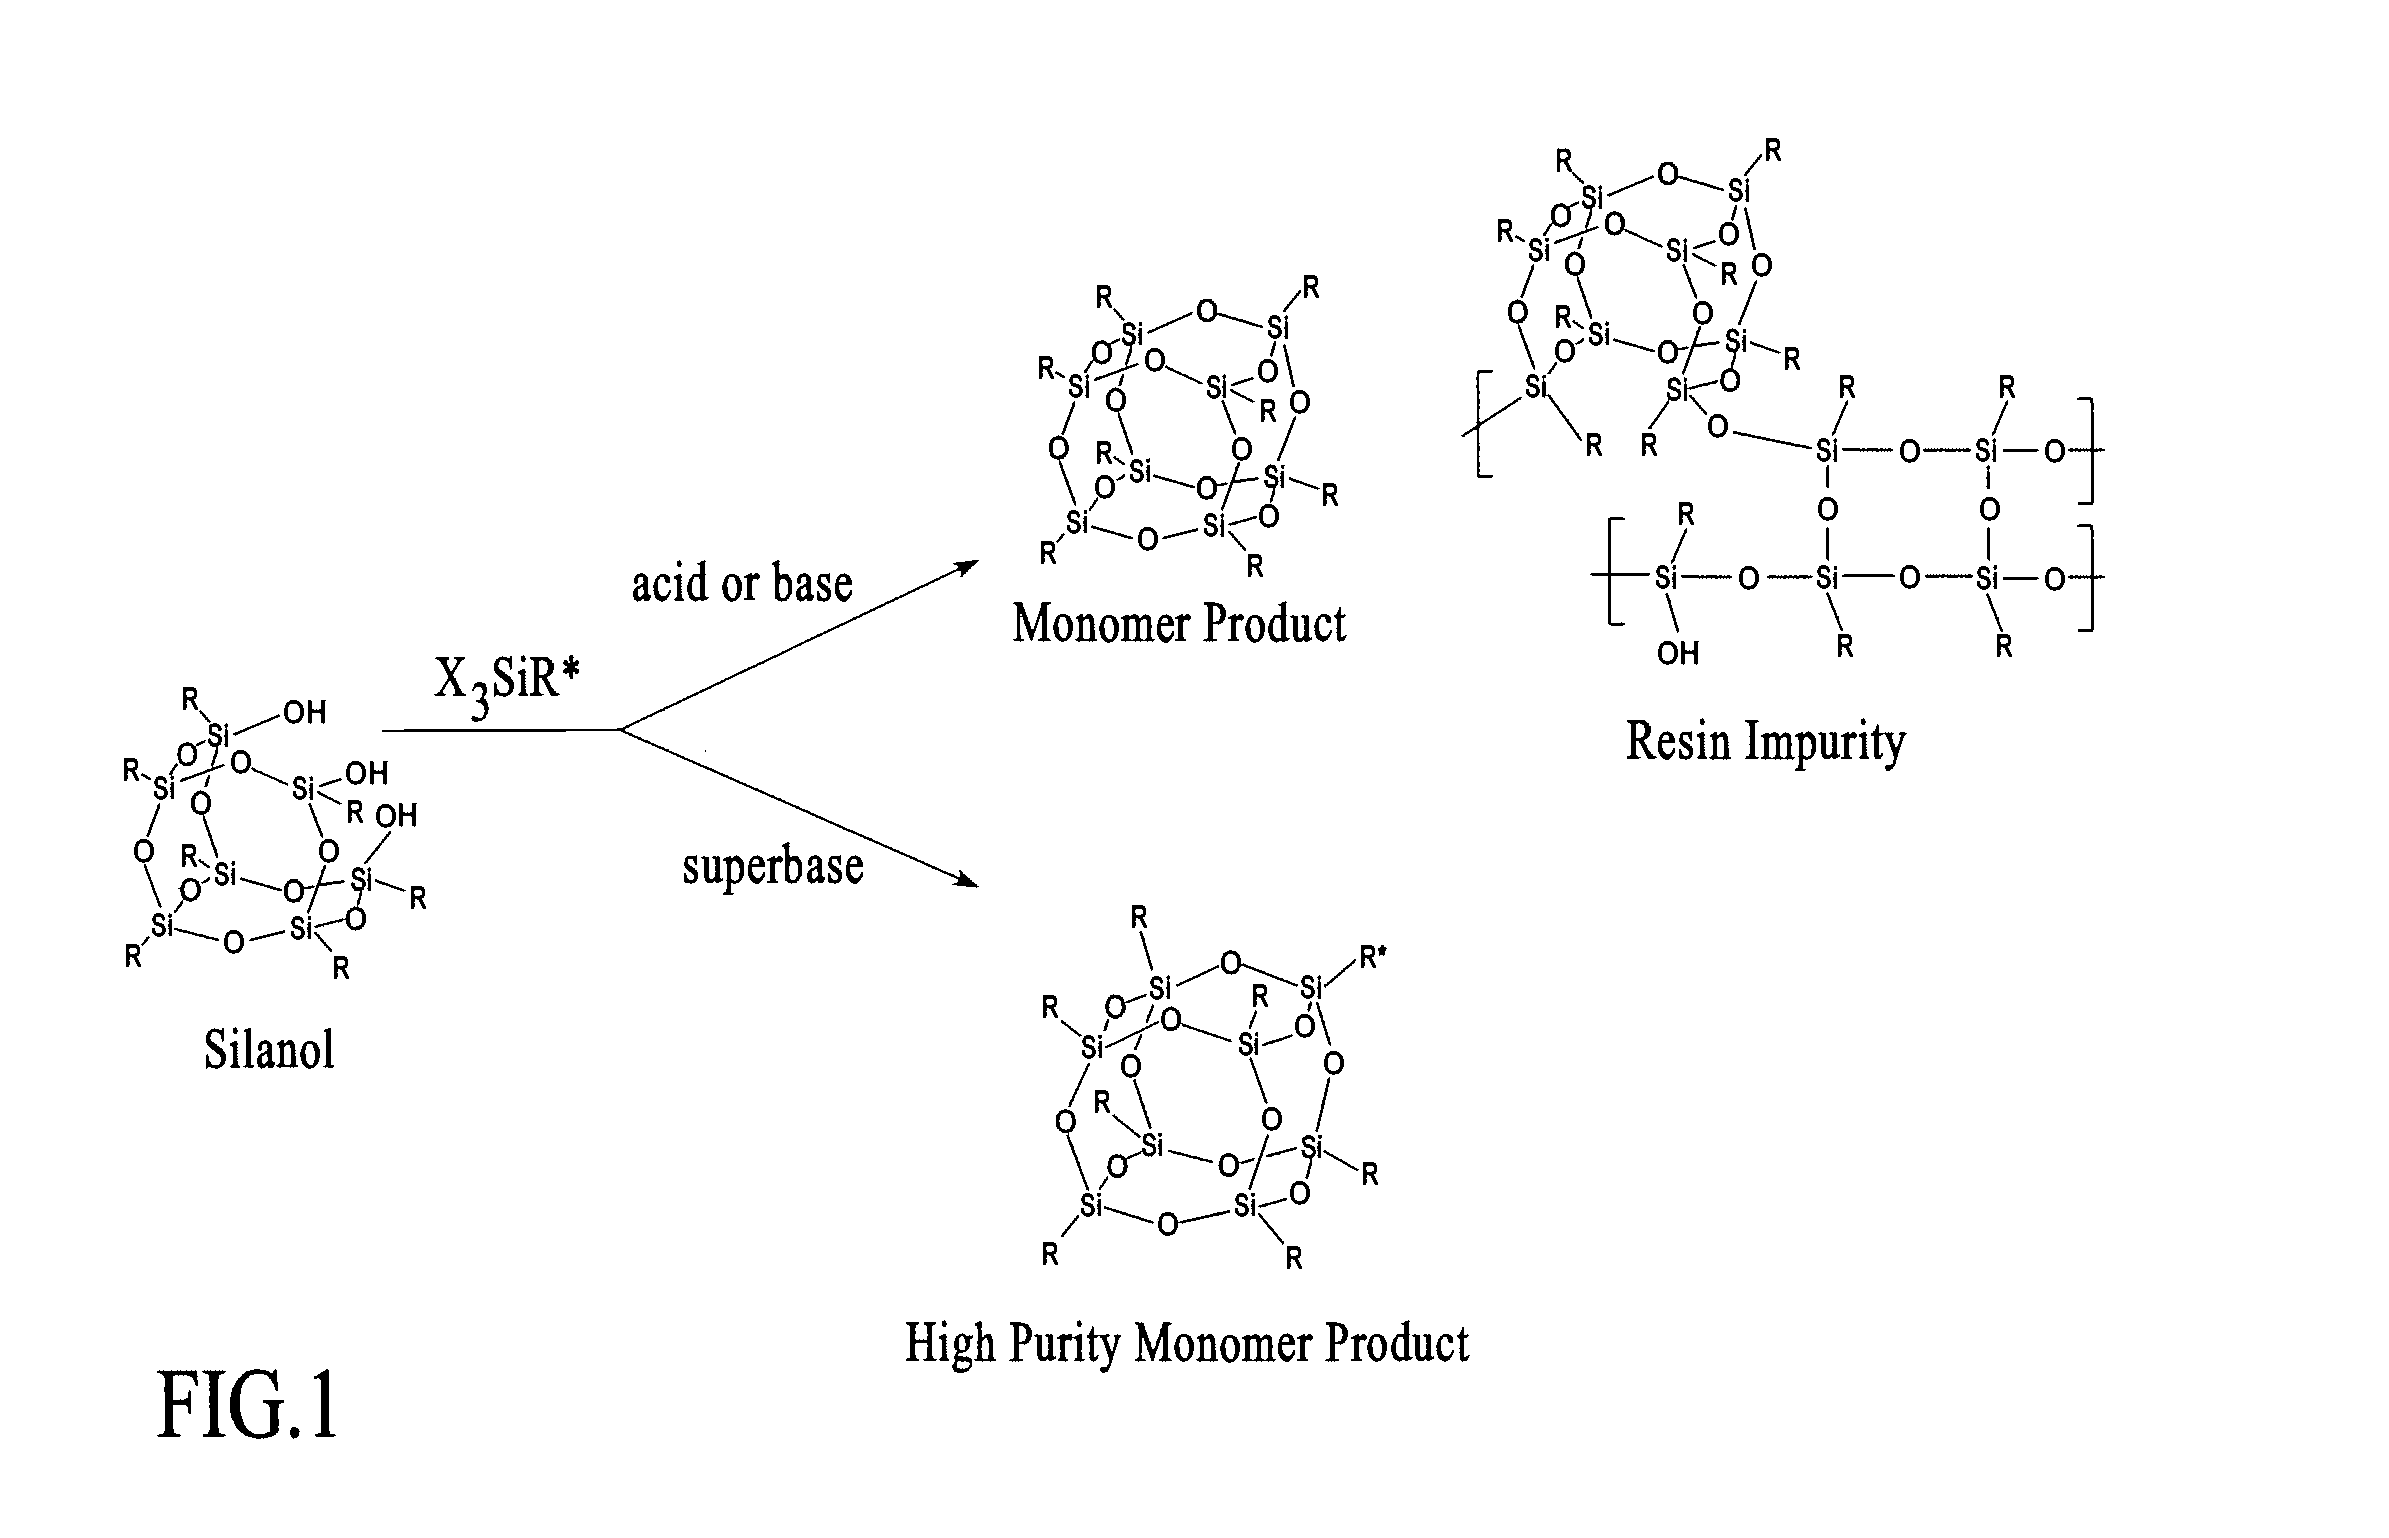 Process for assembly of POSS monomers